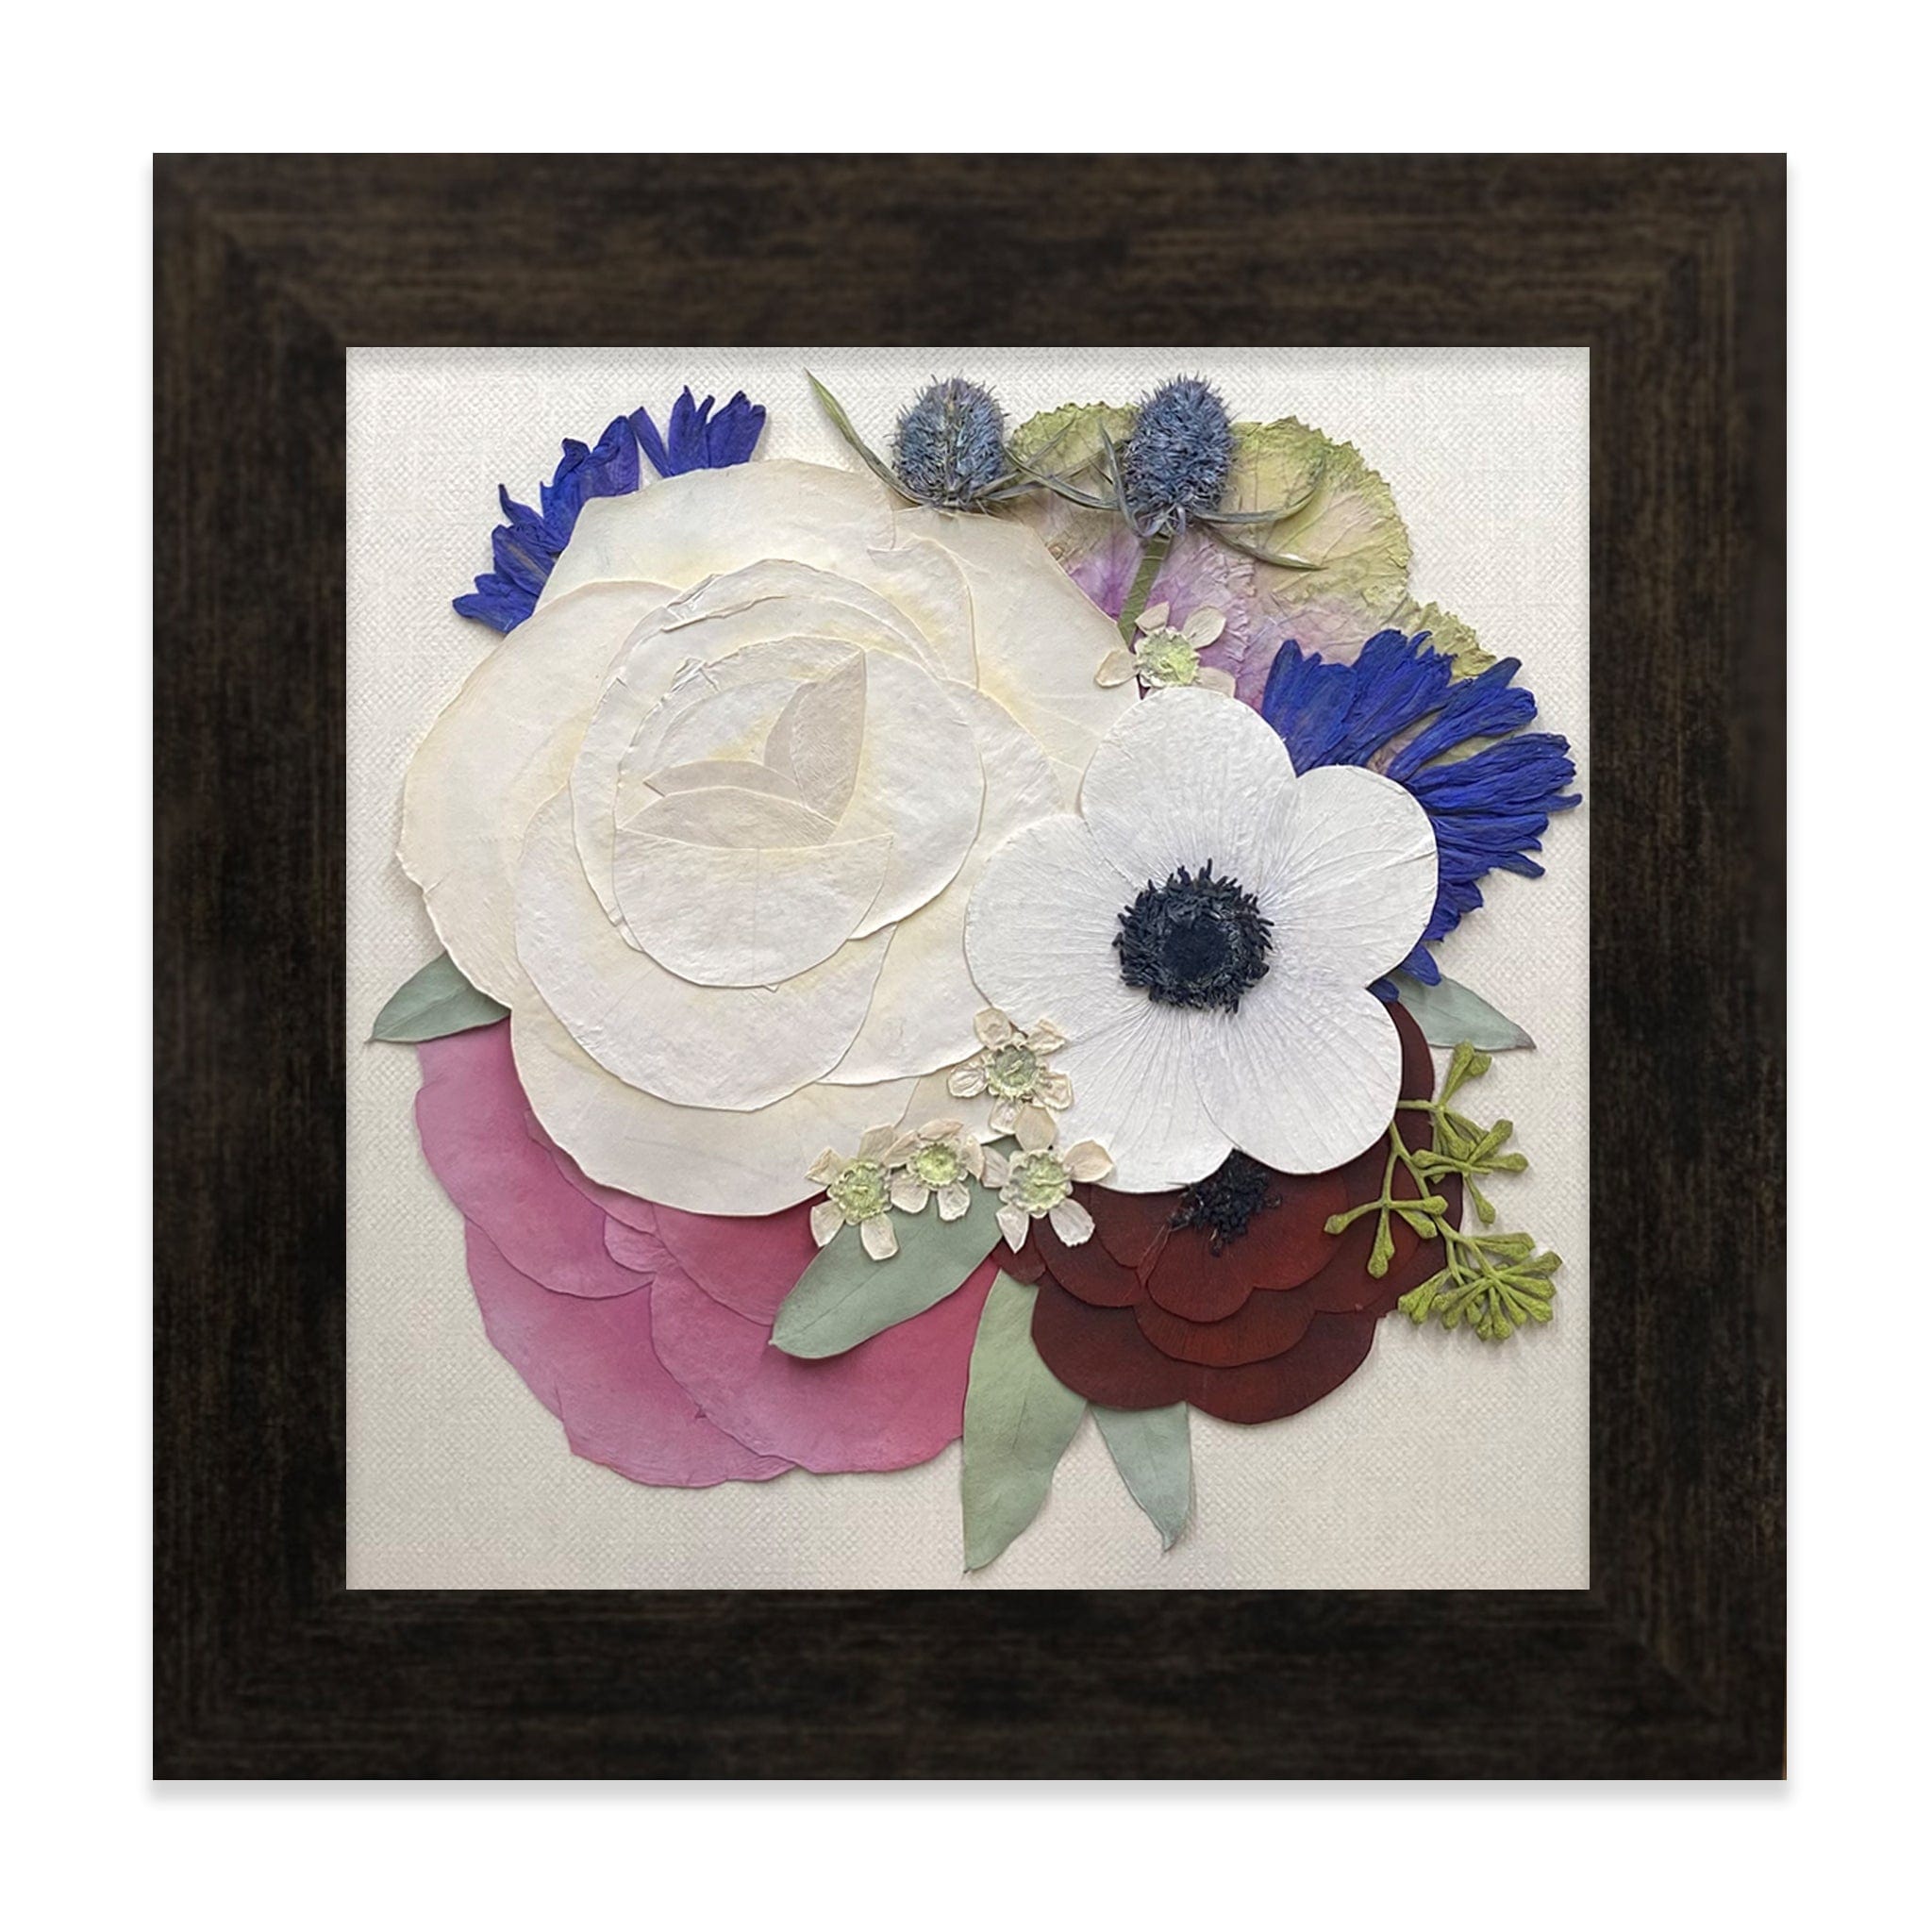 Designs by Andrea Pressed (Framed) 6" x 6" / Square / Small 6" x 6" Classic Frame